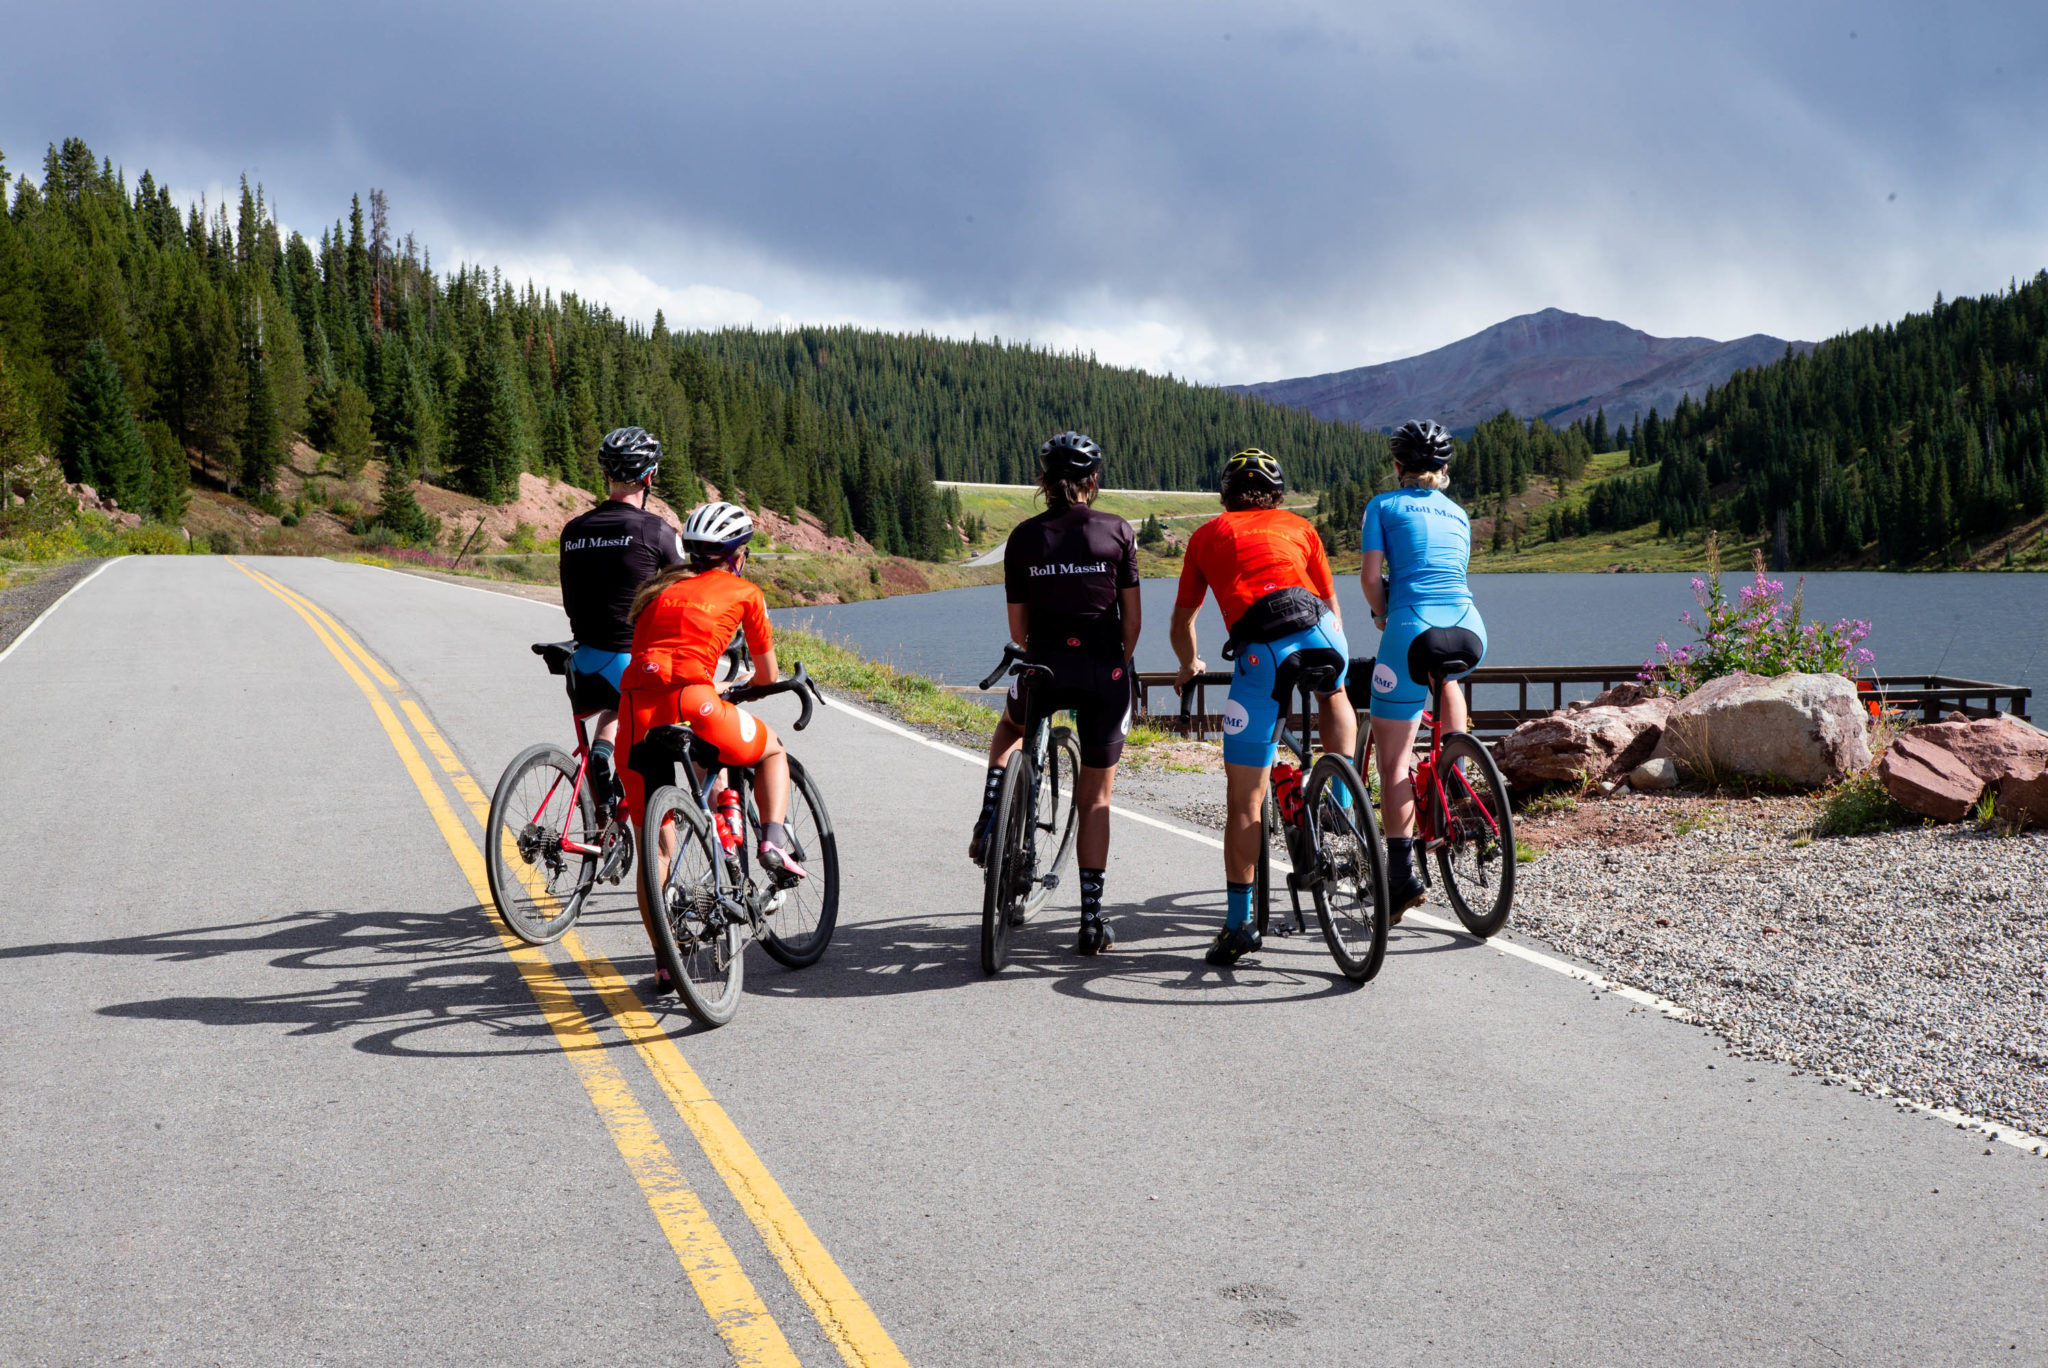 Five people stopped standing over their bikes on a paved road looking at a lake and a mountain.